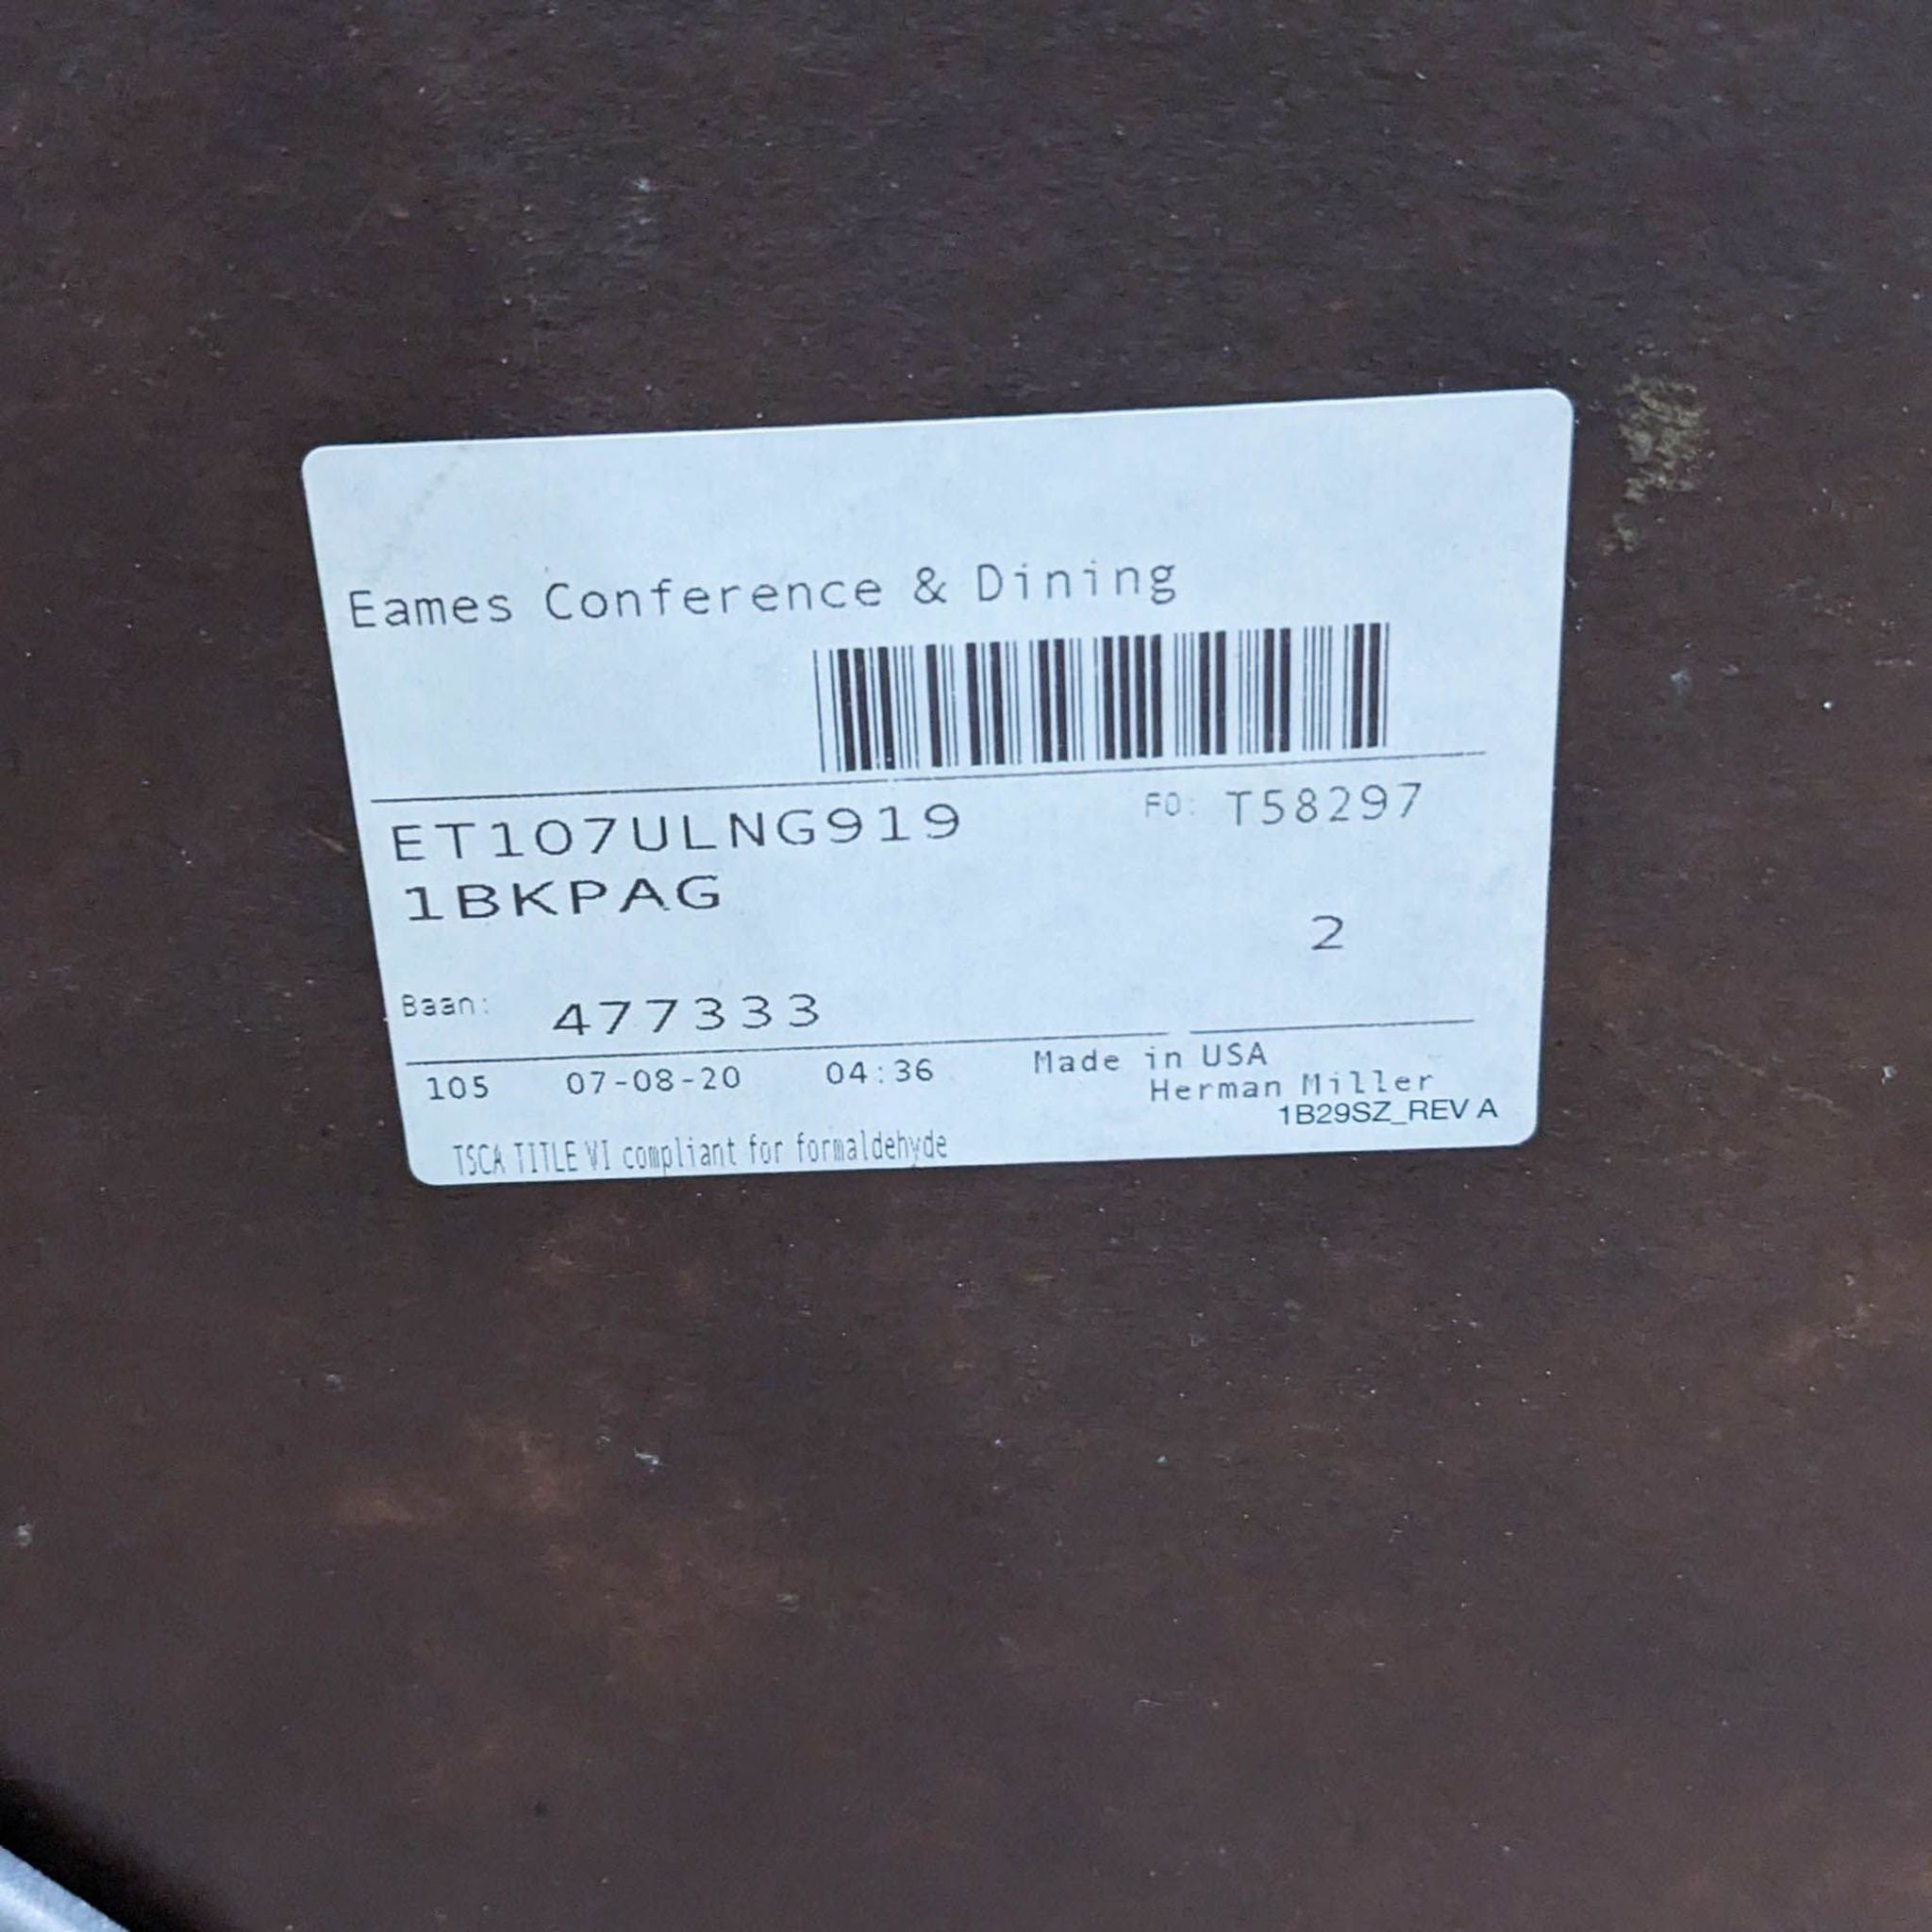 Label on a Herman Miller Eames dining table showing product details.